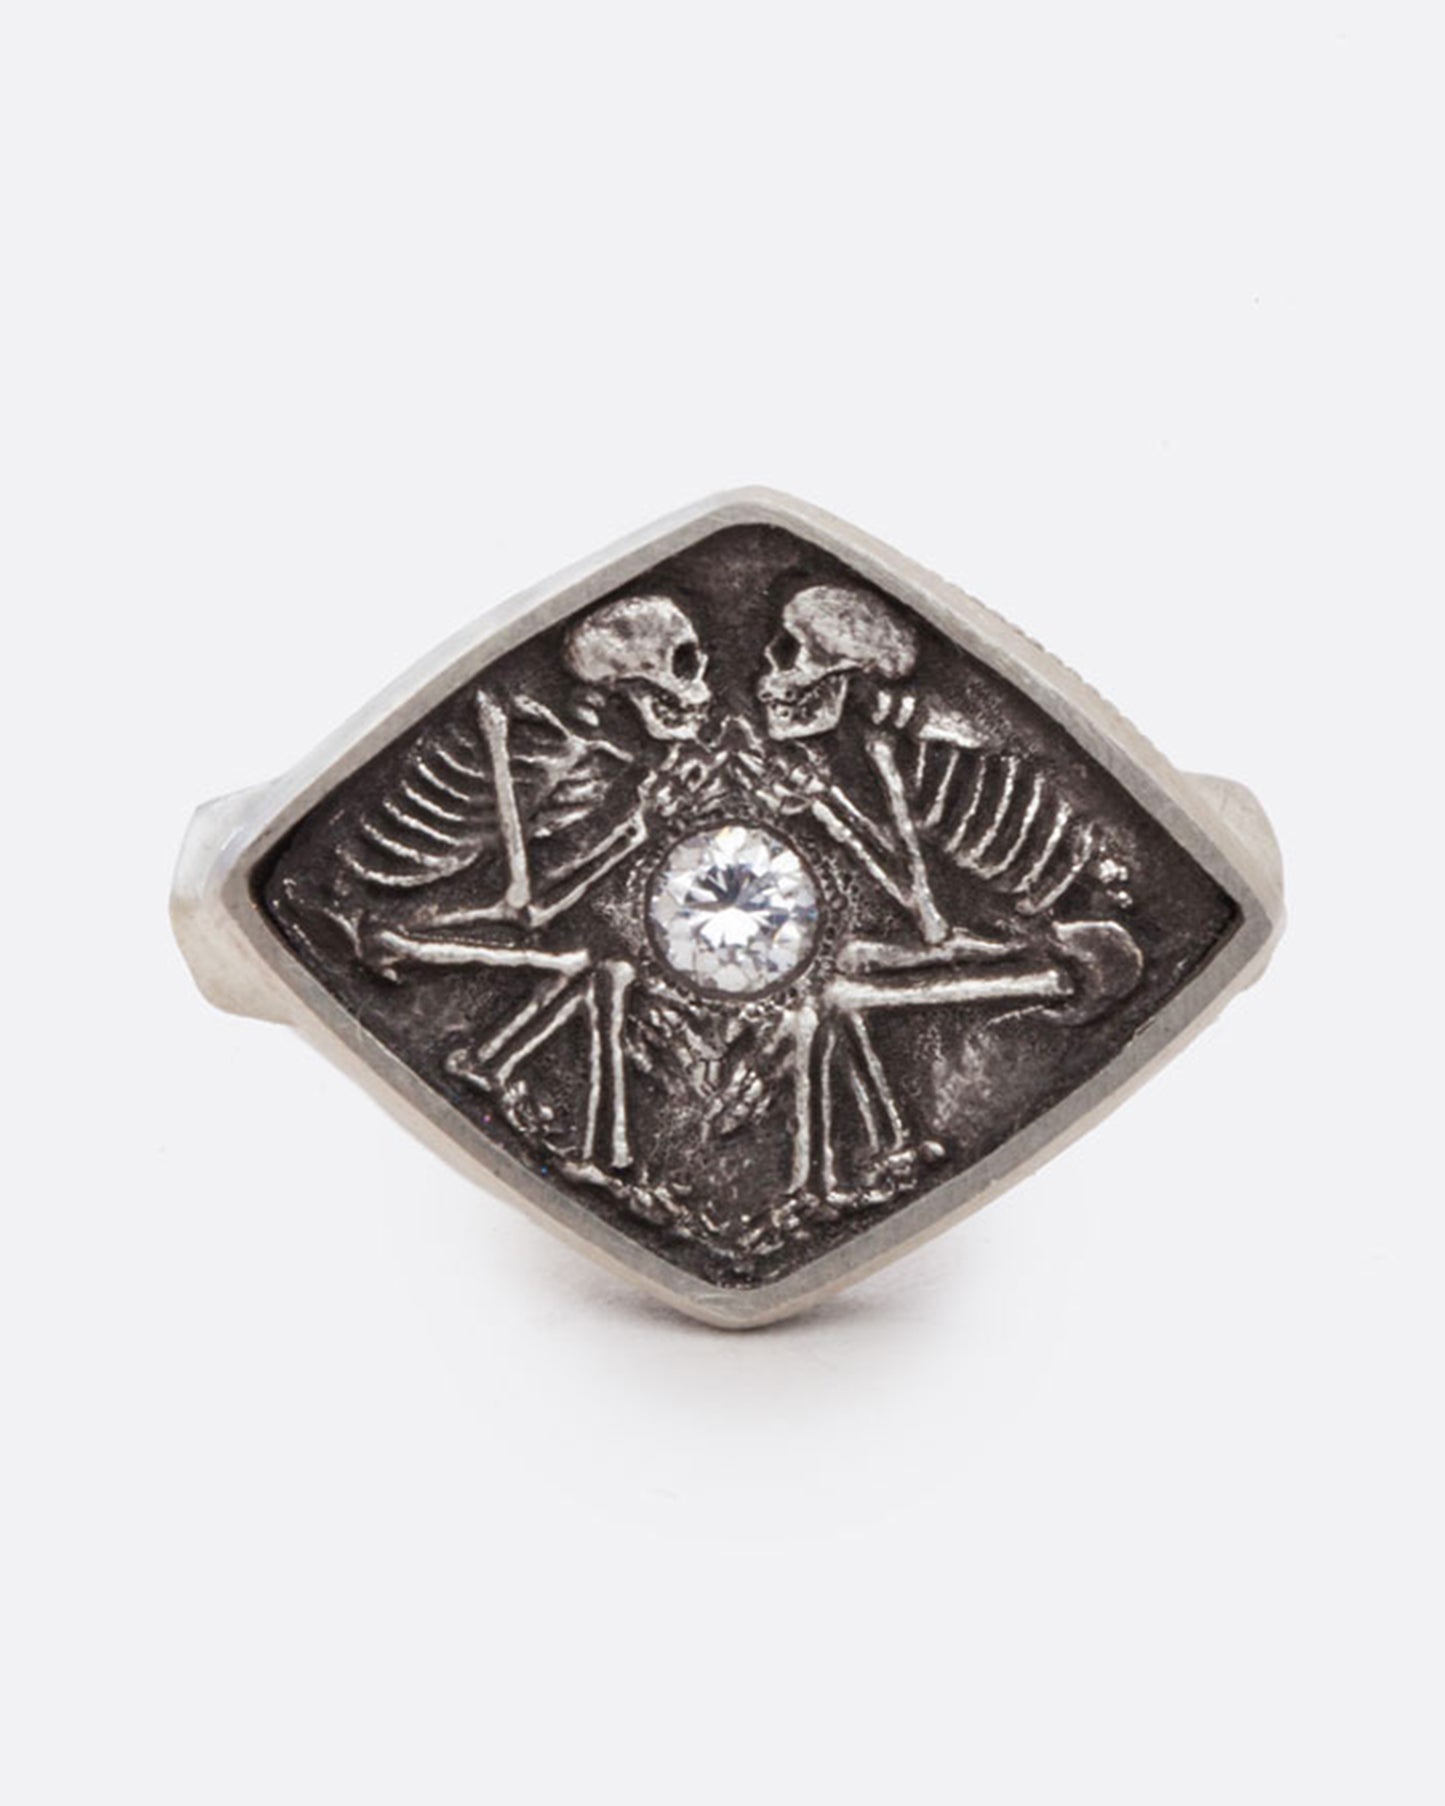 A sterling silver ring with two skeletons facing each other, lying in lovely death with a round diamond resting in their hands, glowing between them